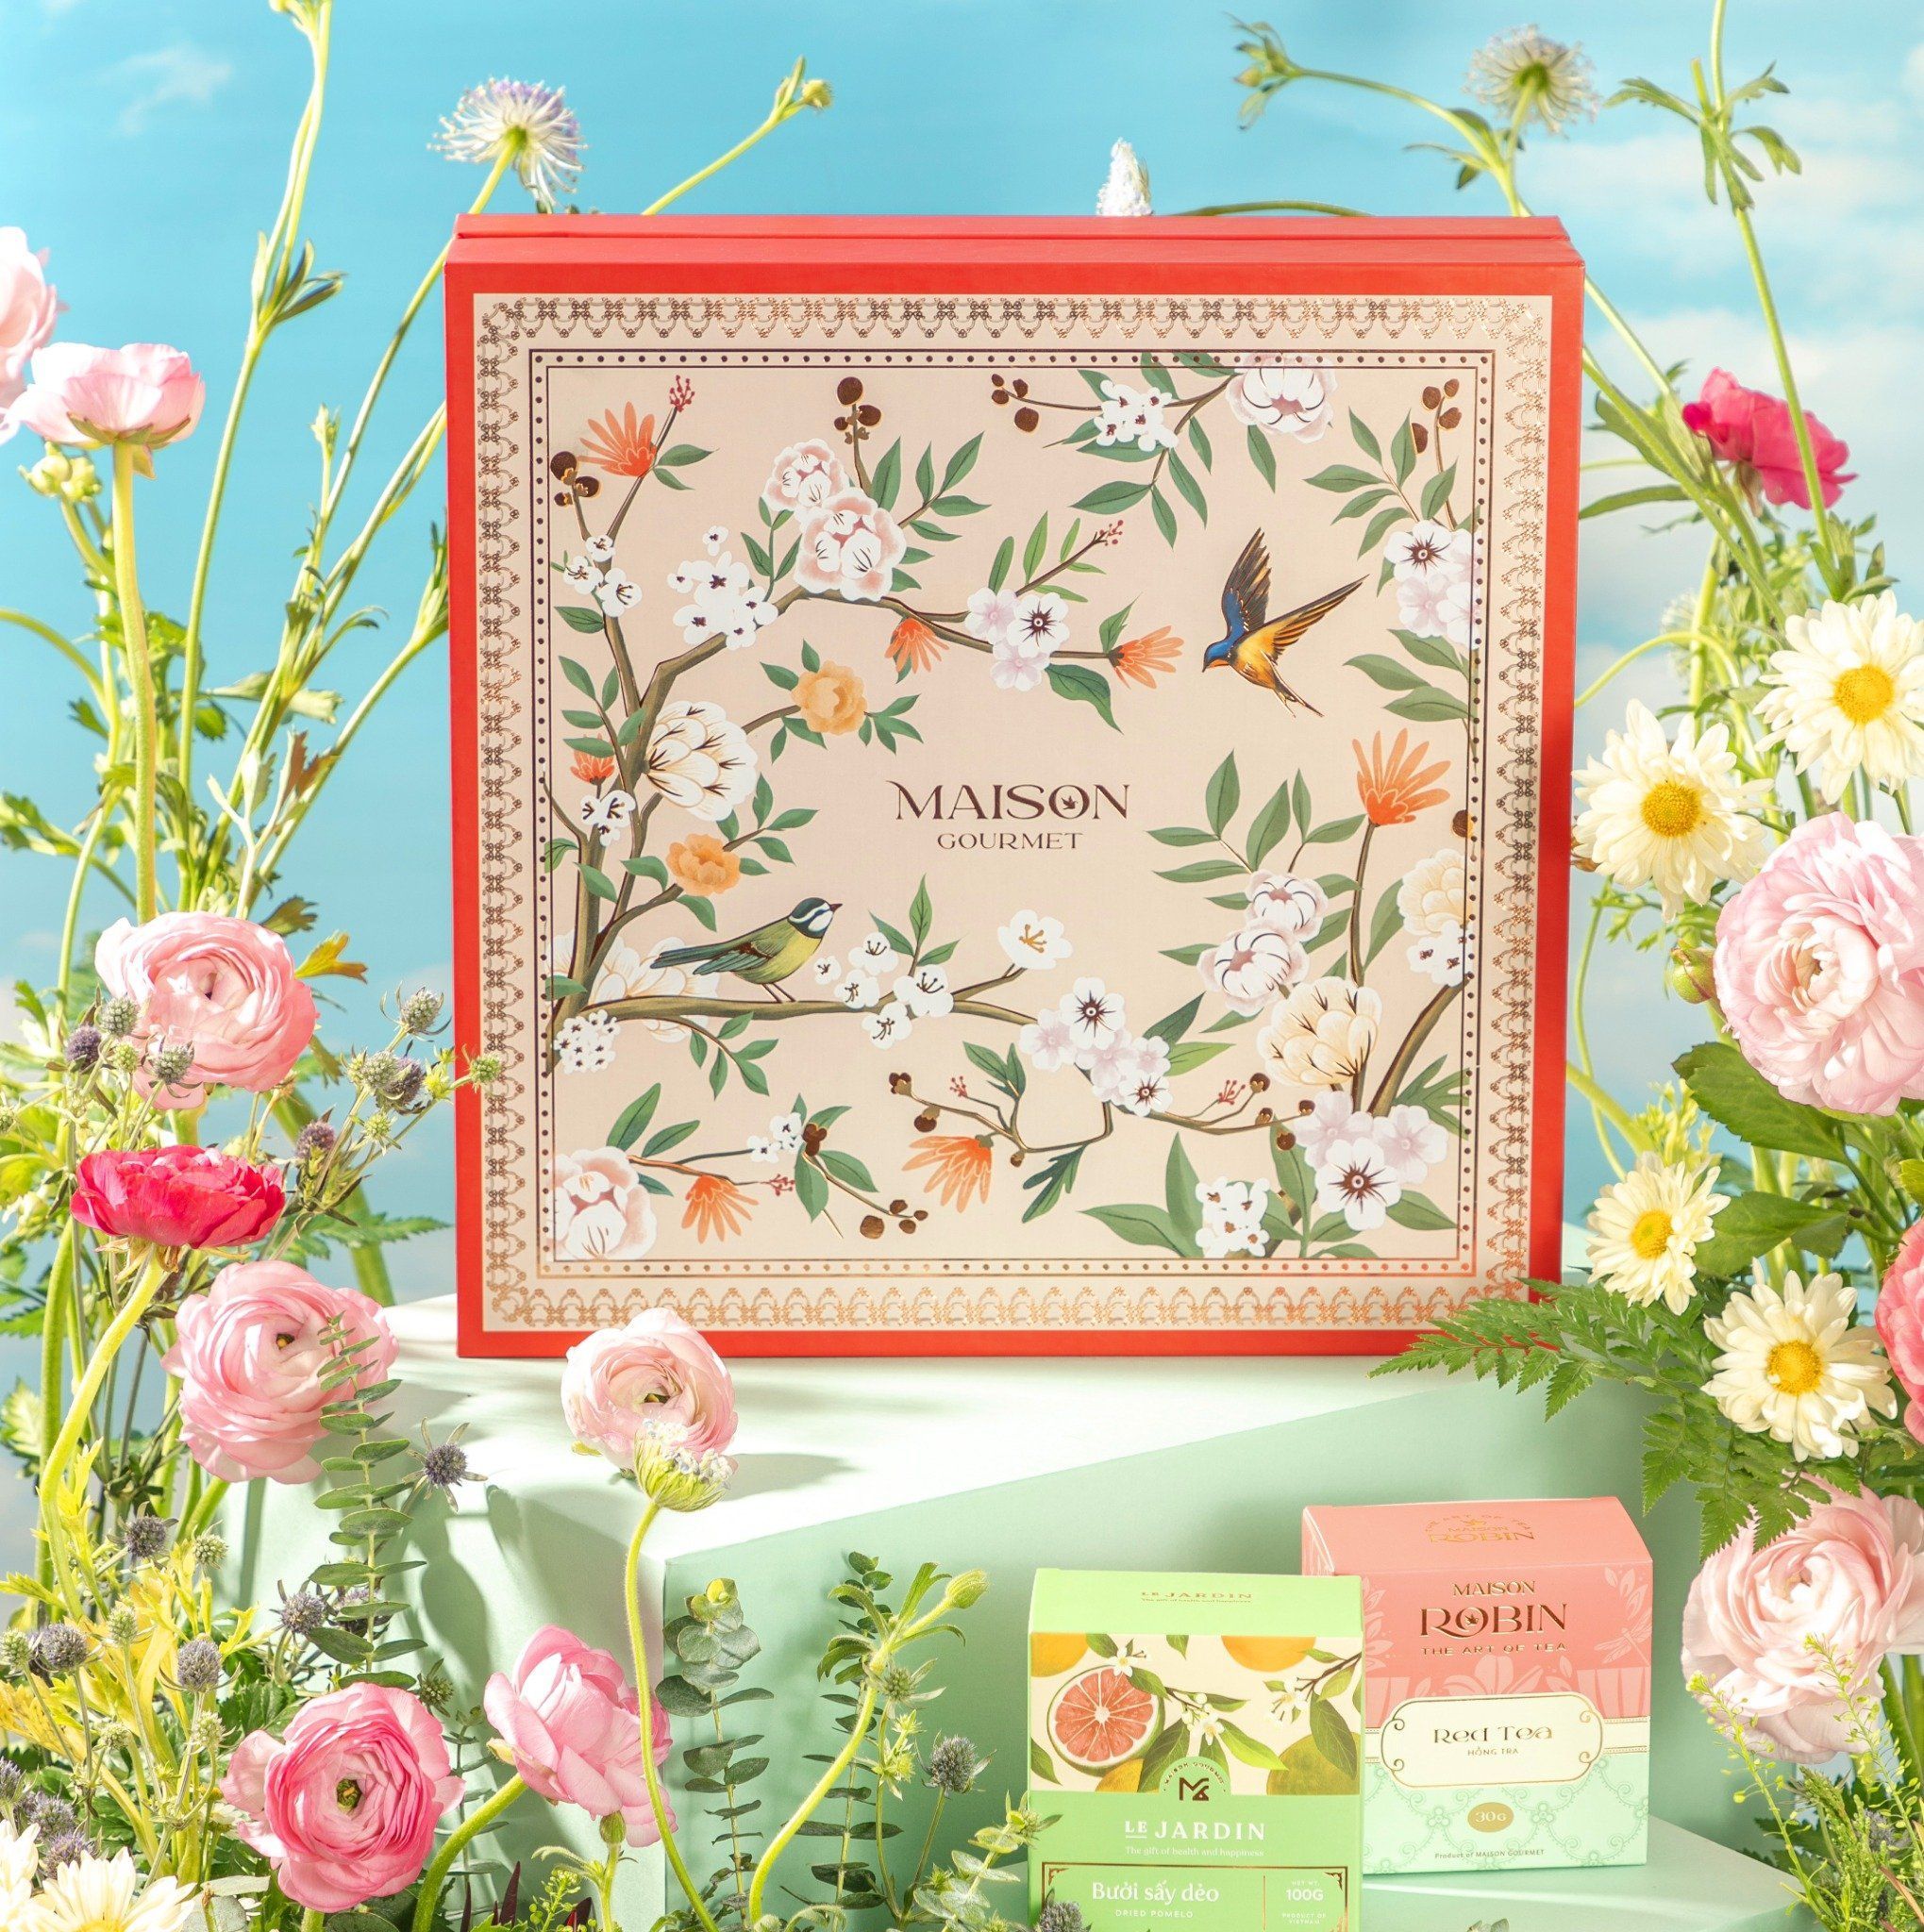 THE BEAUTY OF SPRING GIFT BOX 1